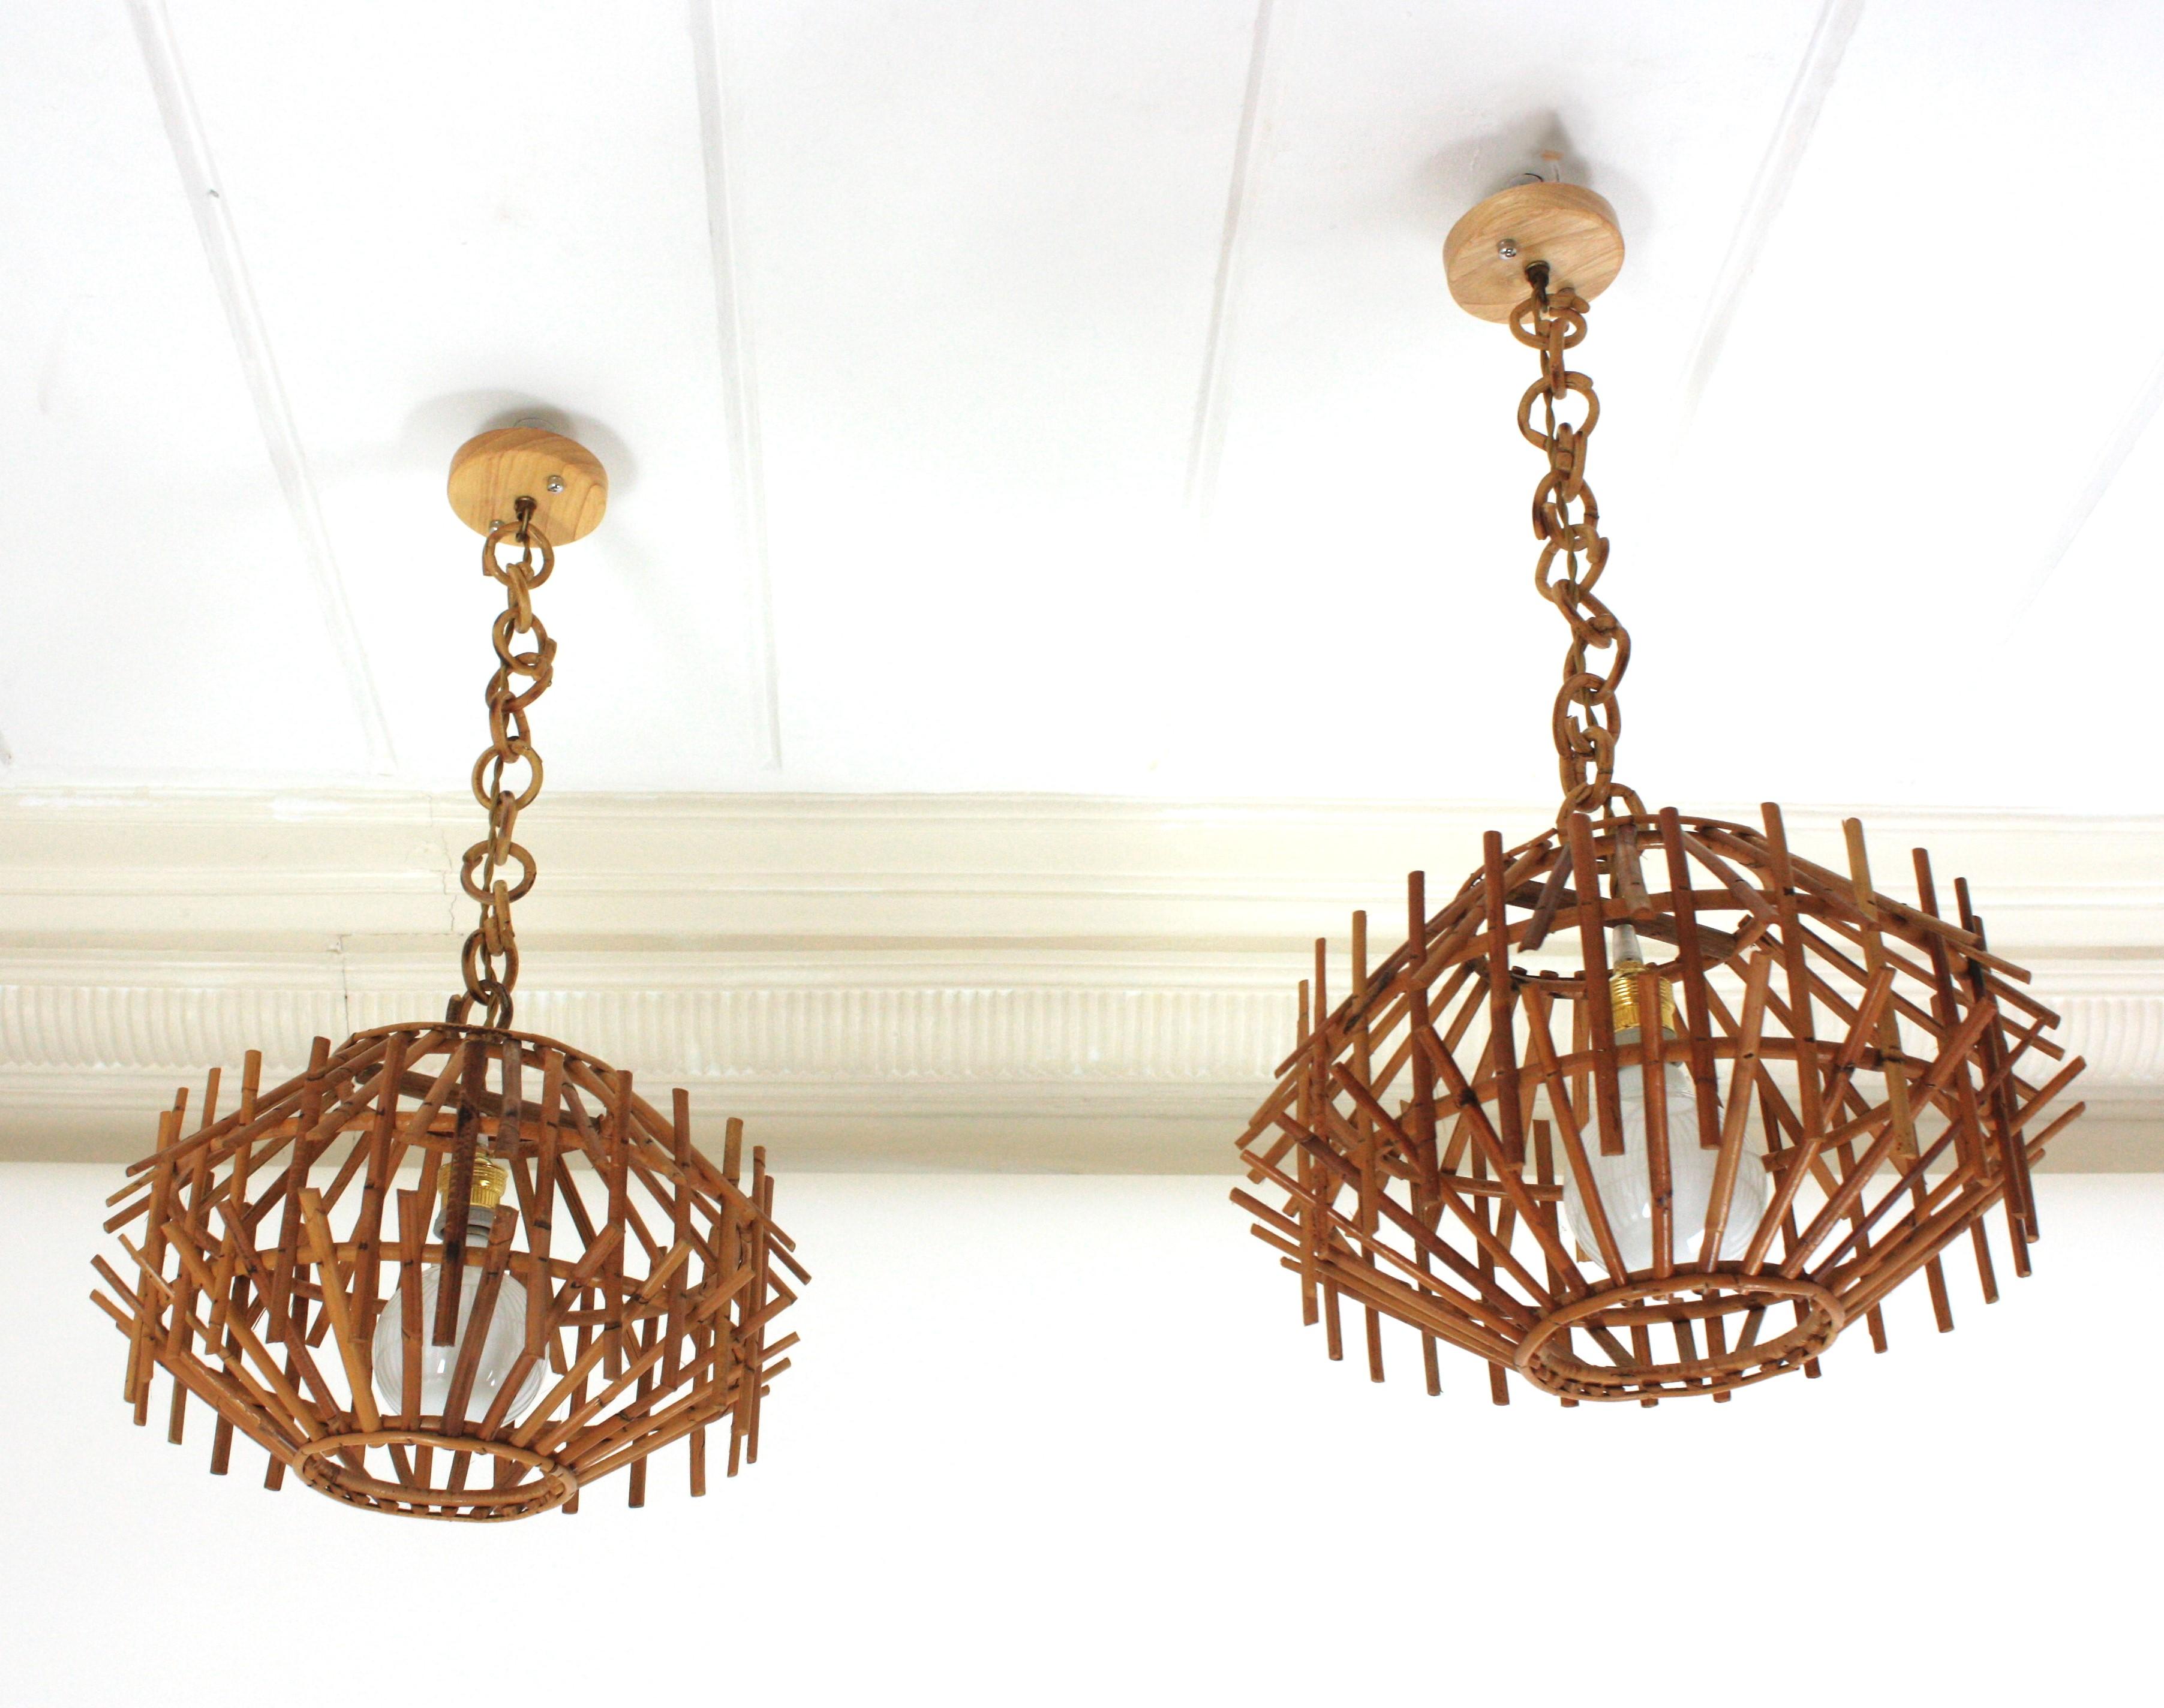 Pair of Rattan Pagoda Pendant Lights or Lanterns, 1960s For Sale 4